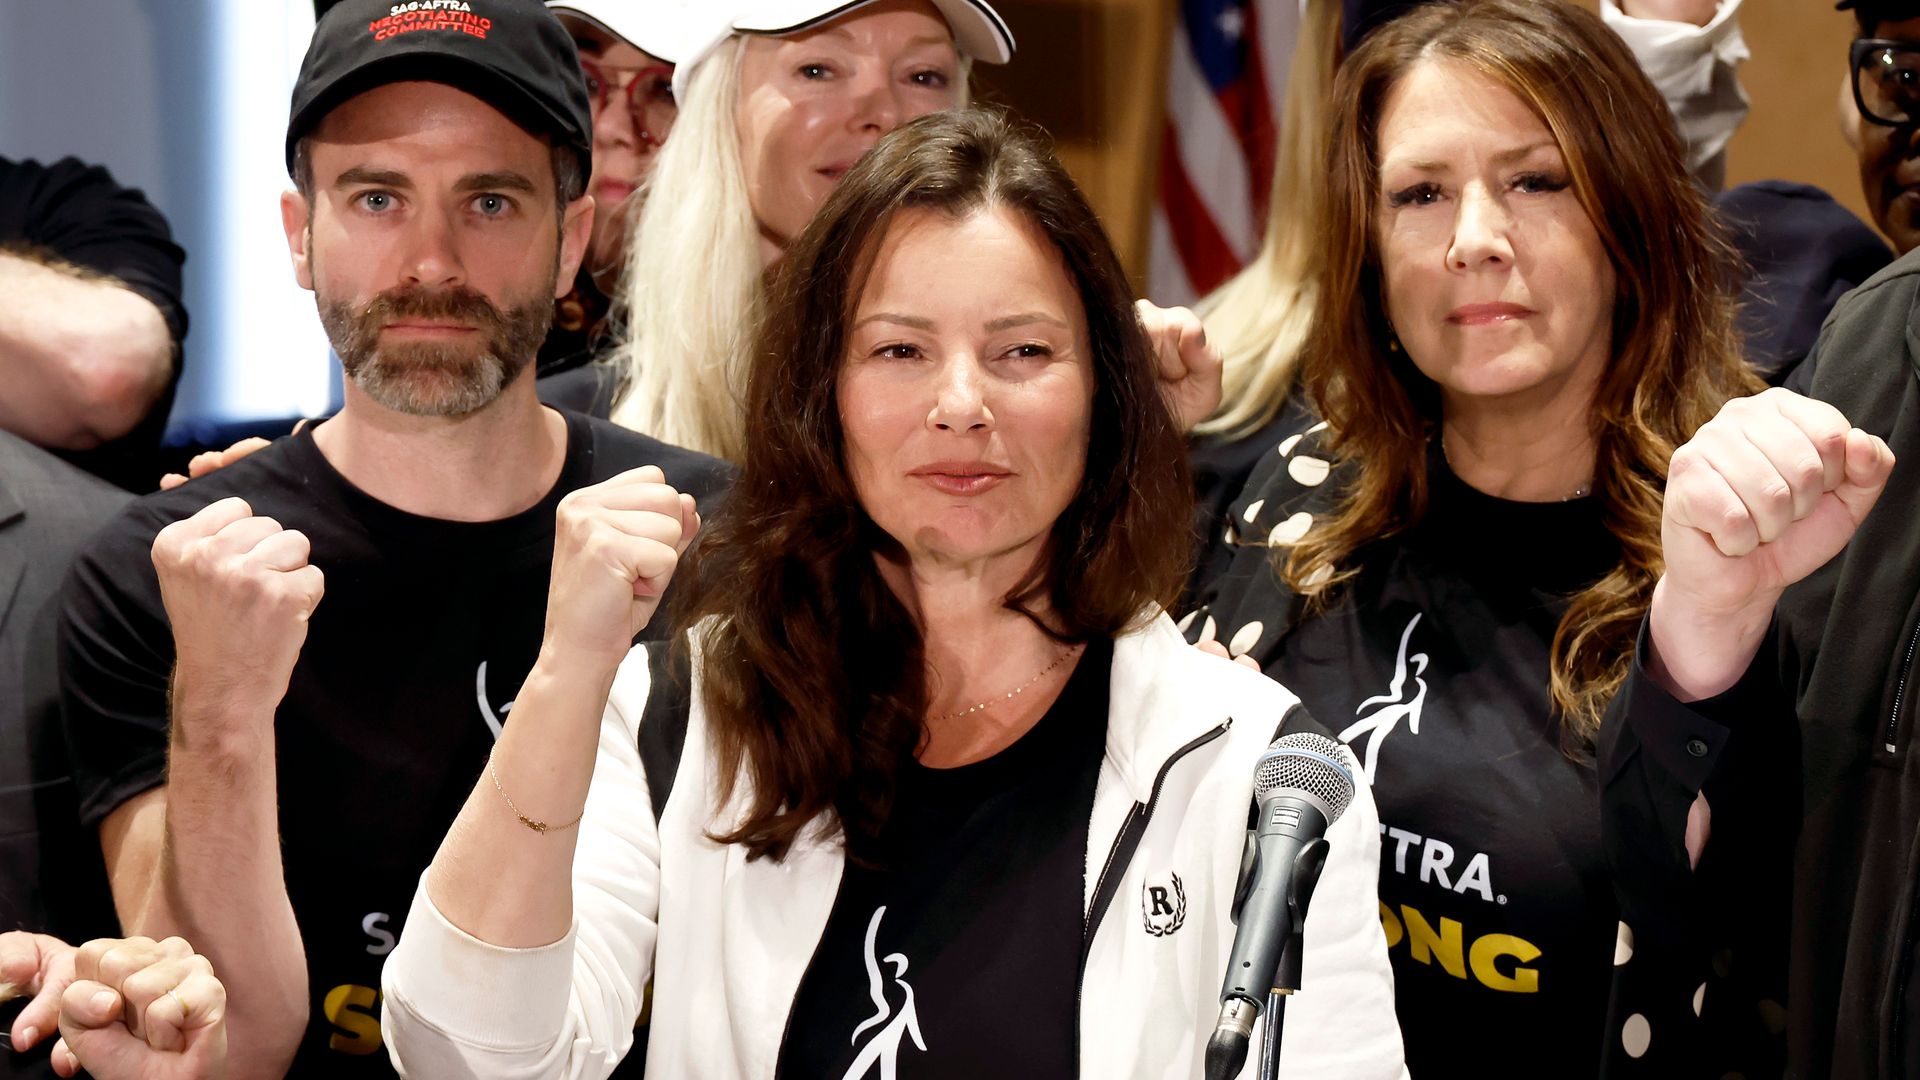 Ben Whitehair, Frances Fisher, SAG President Fran Drescher, Joely Fisher, National Executive Director, and SAG-AFTRA members are seen as SAG-AFTRA National Board holds a press conference for vote on recommendation to call a strike 